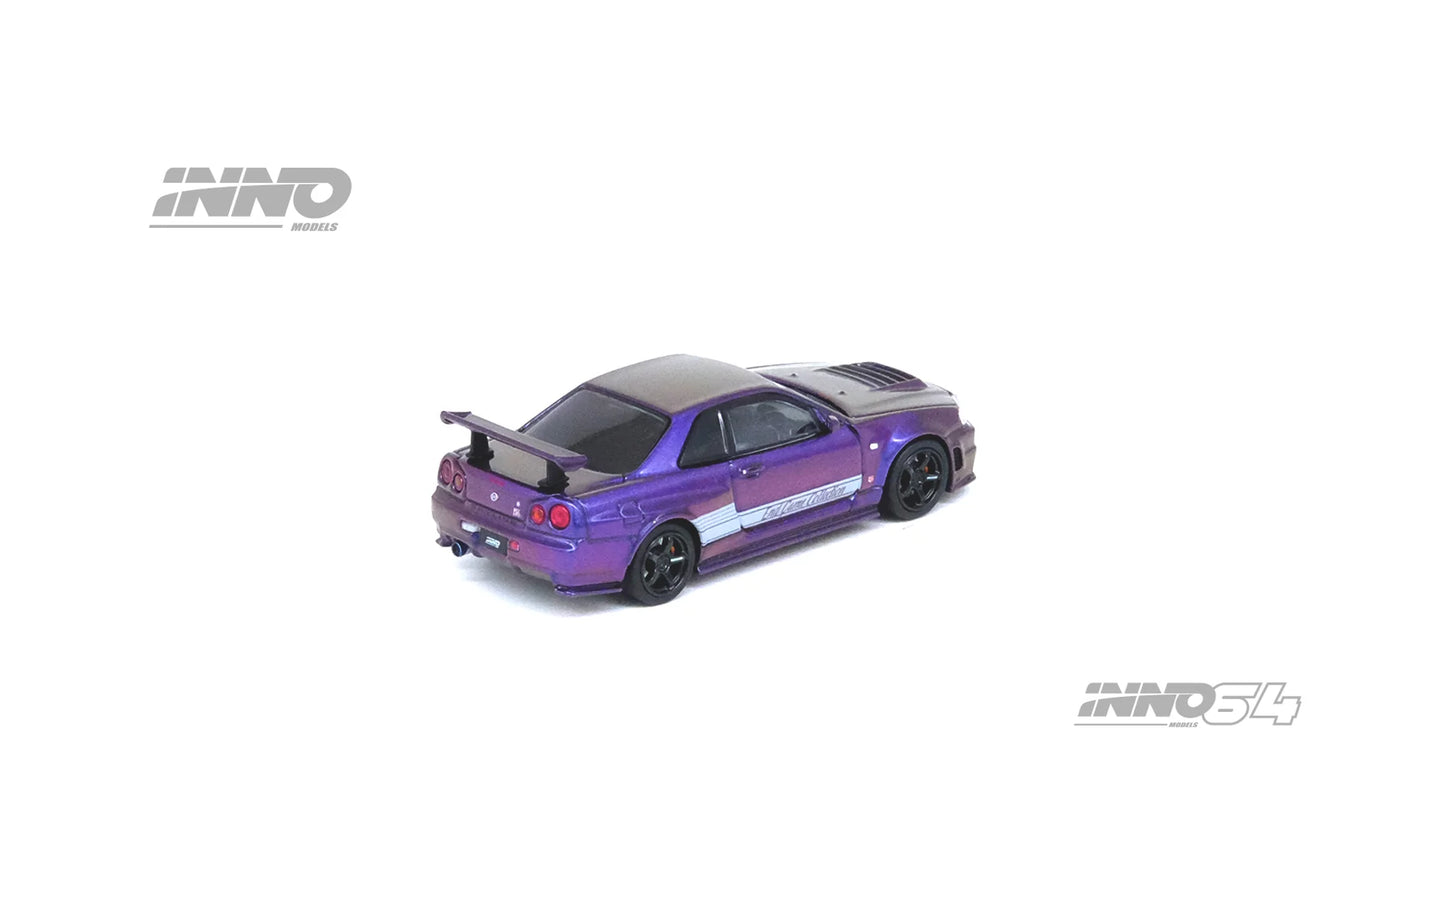 Inno64 Australia Special Edition Nissan Skyline GTR R34 End Game Collection Purple 1:64